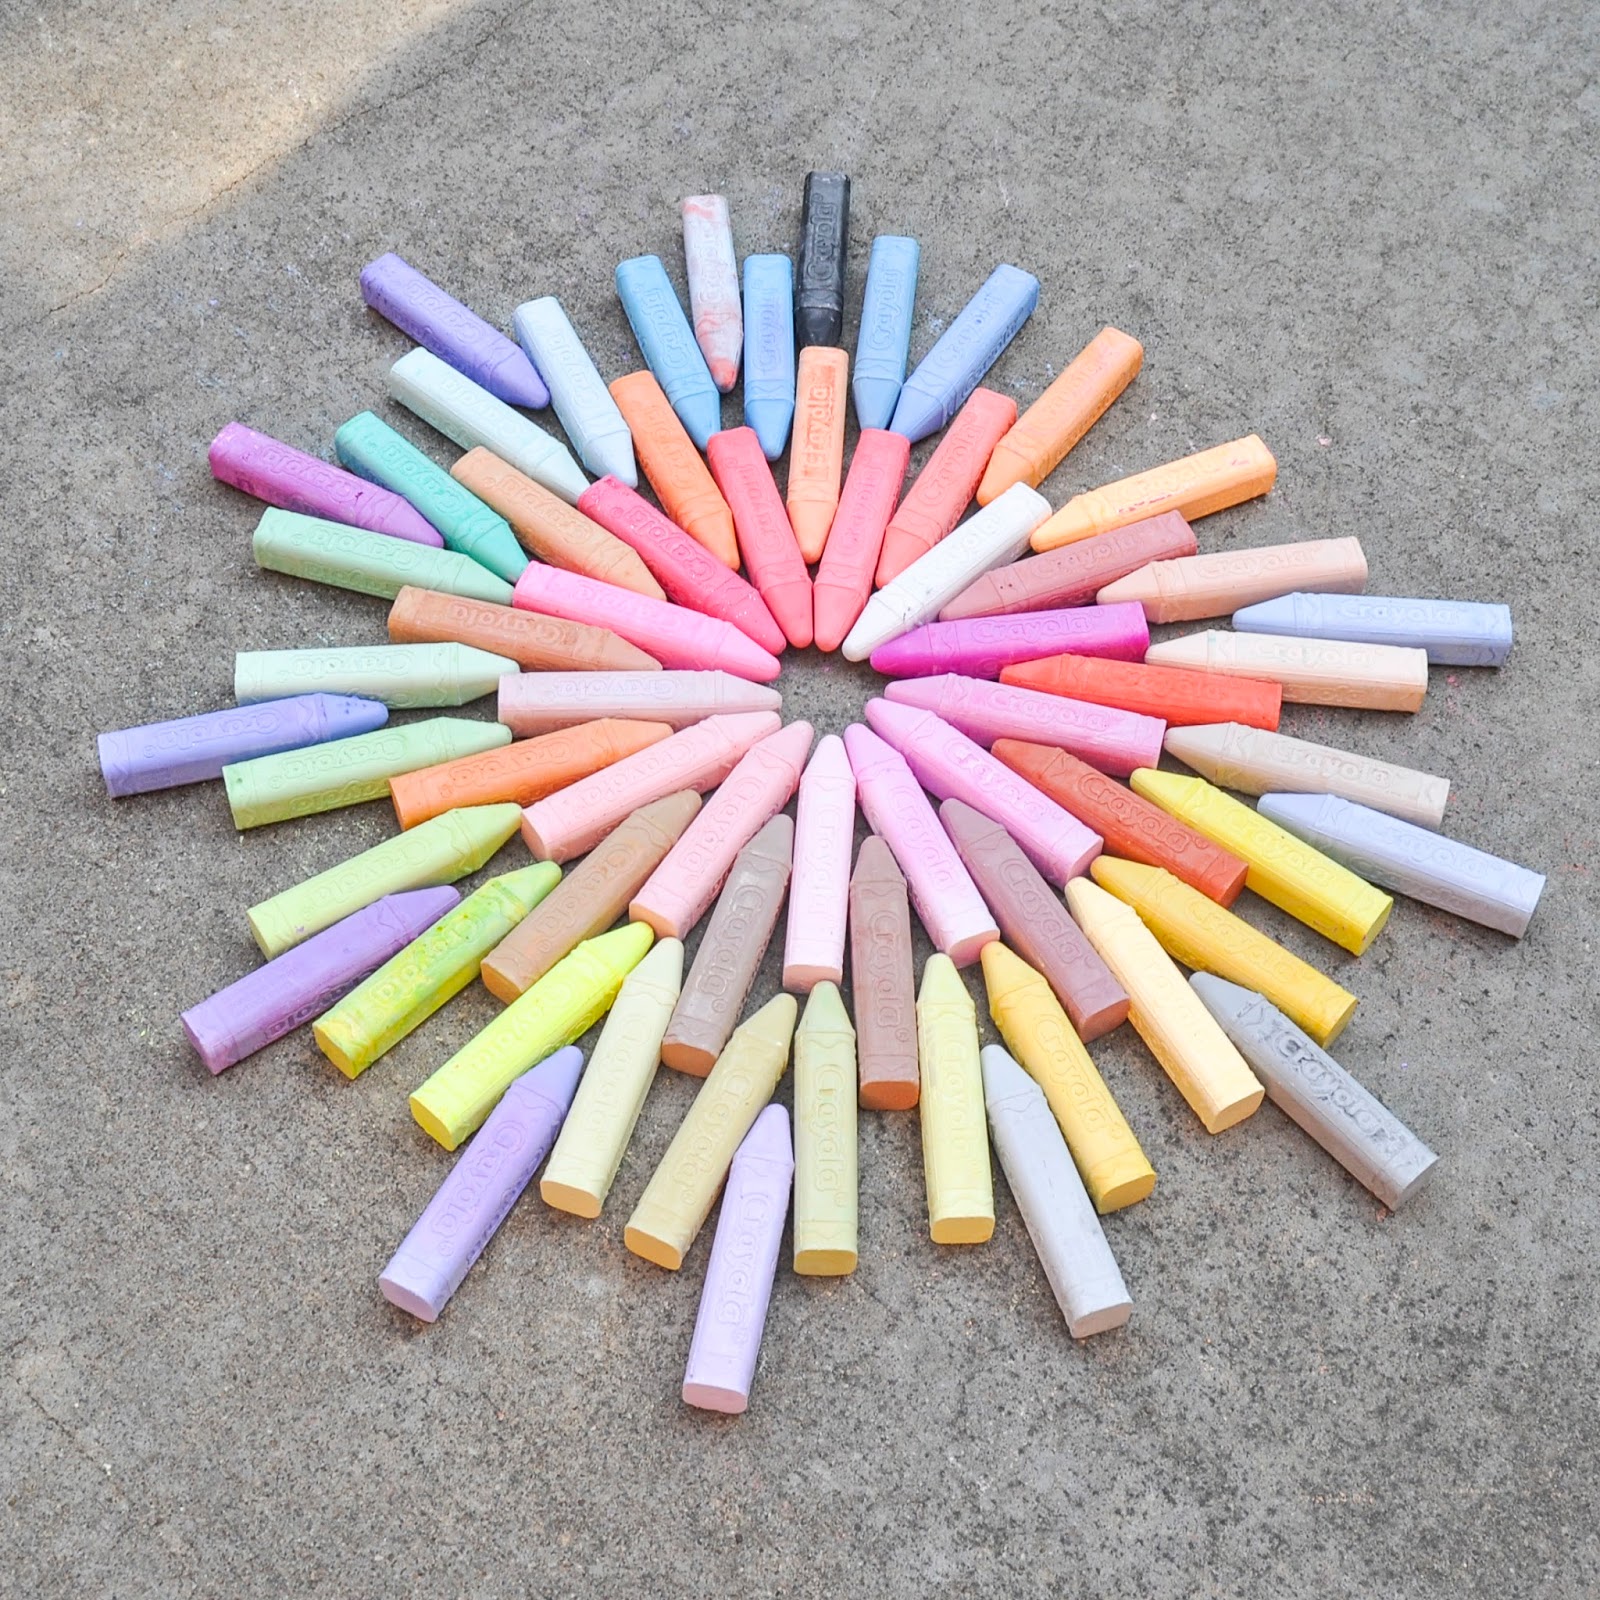 Crayola 64 Count Chalk Review